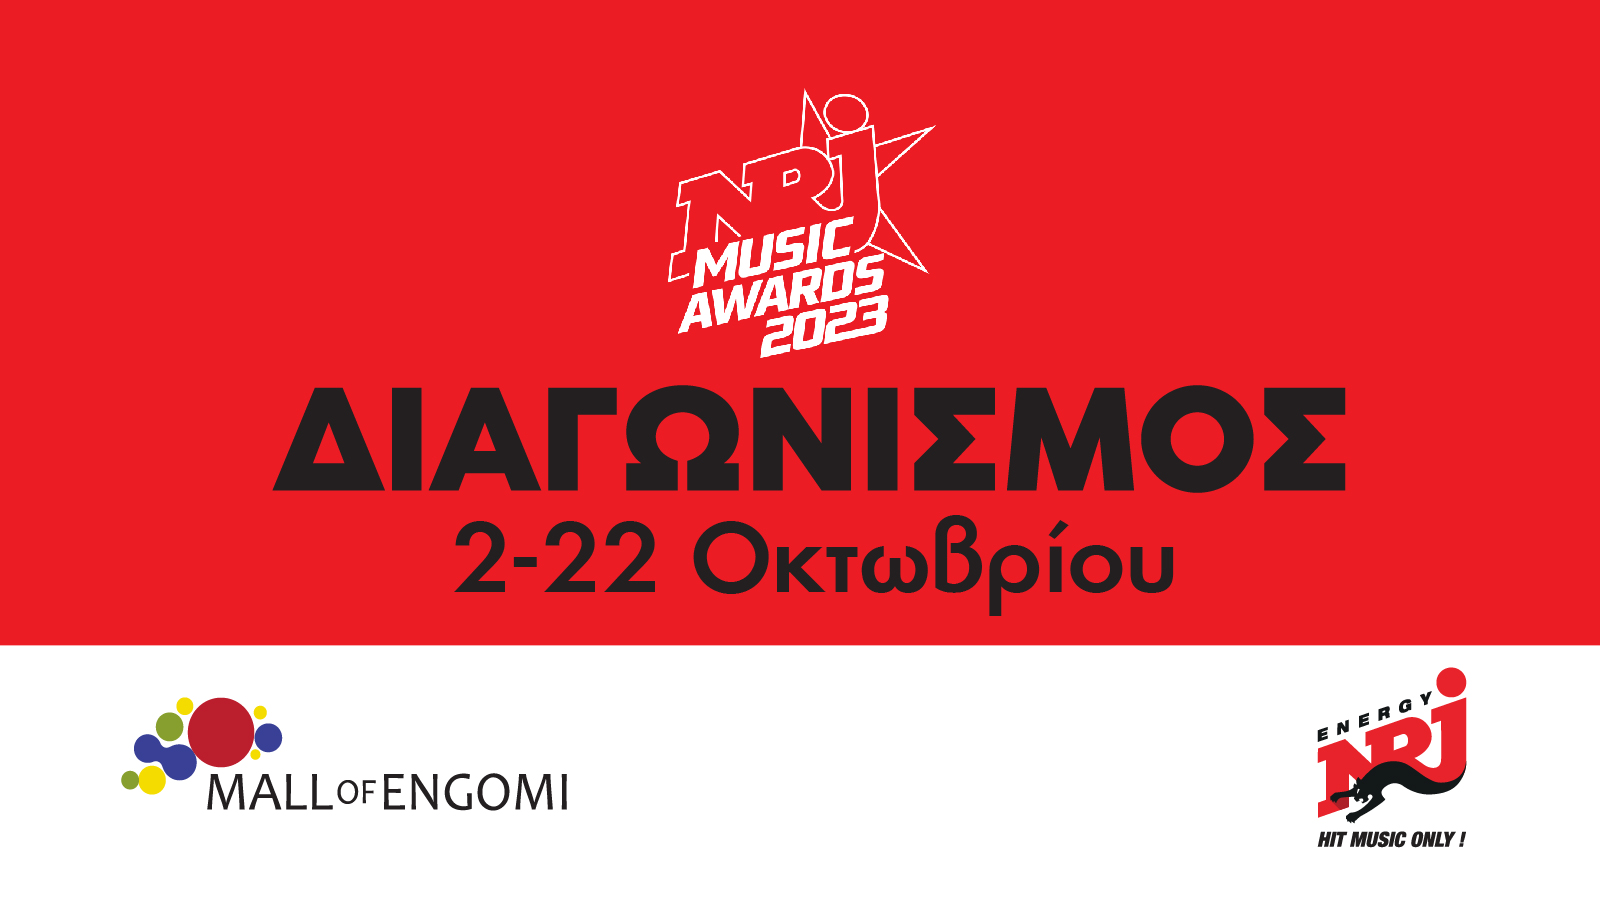 NRJ Music Awards Competition 2023